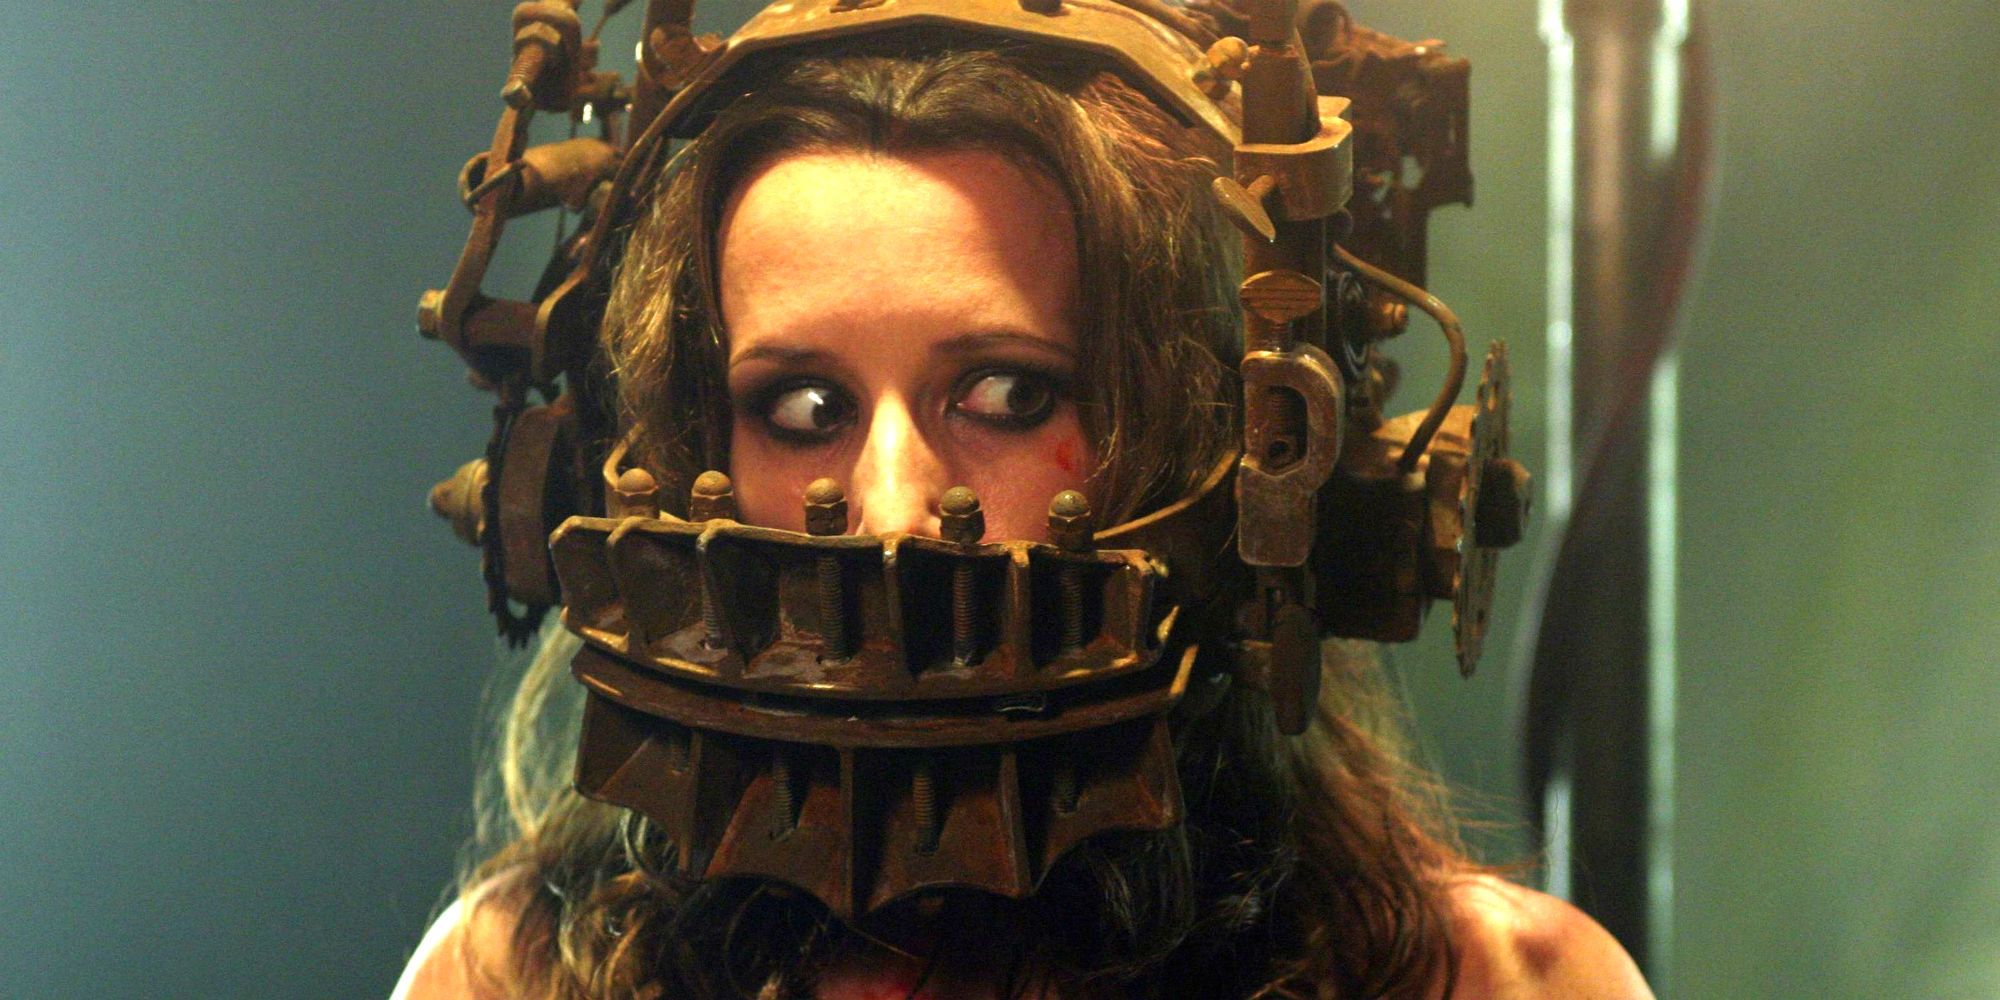 Amanda Young in the Reverse Bear Trap in Saw.